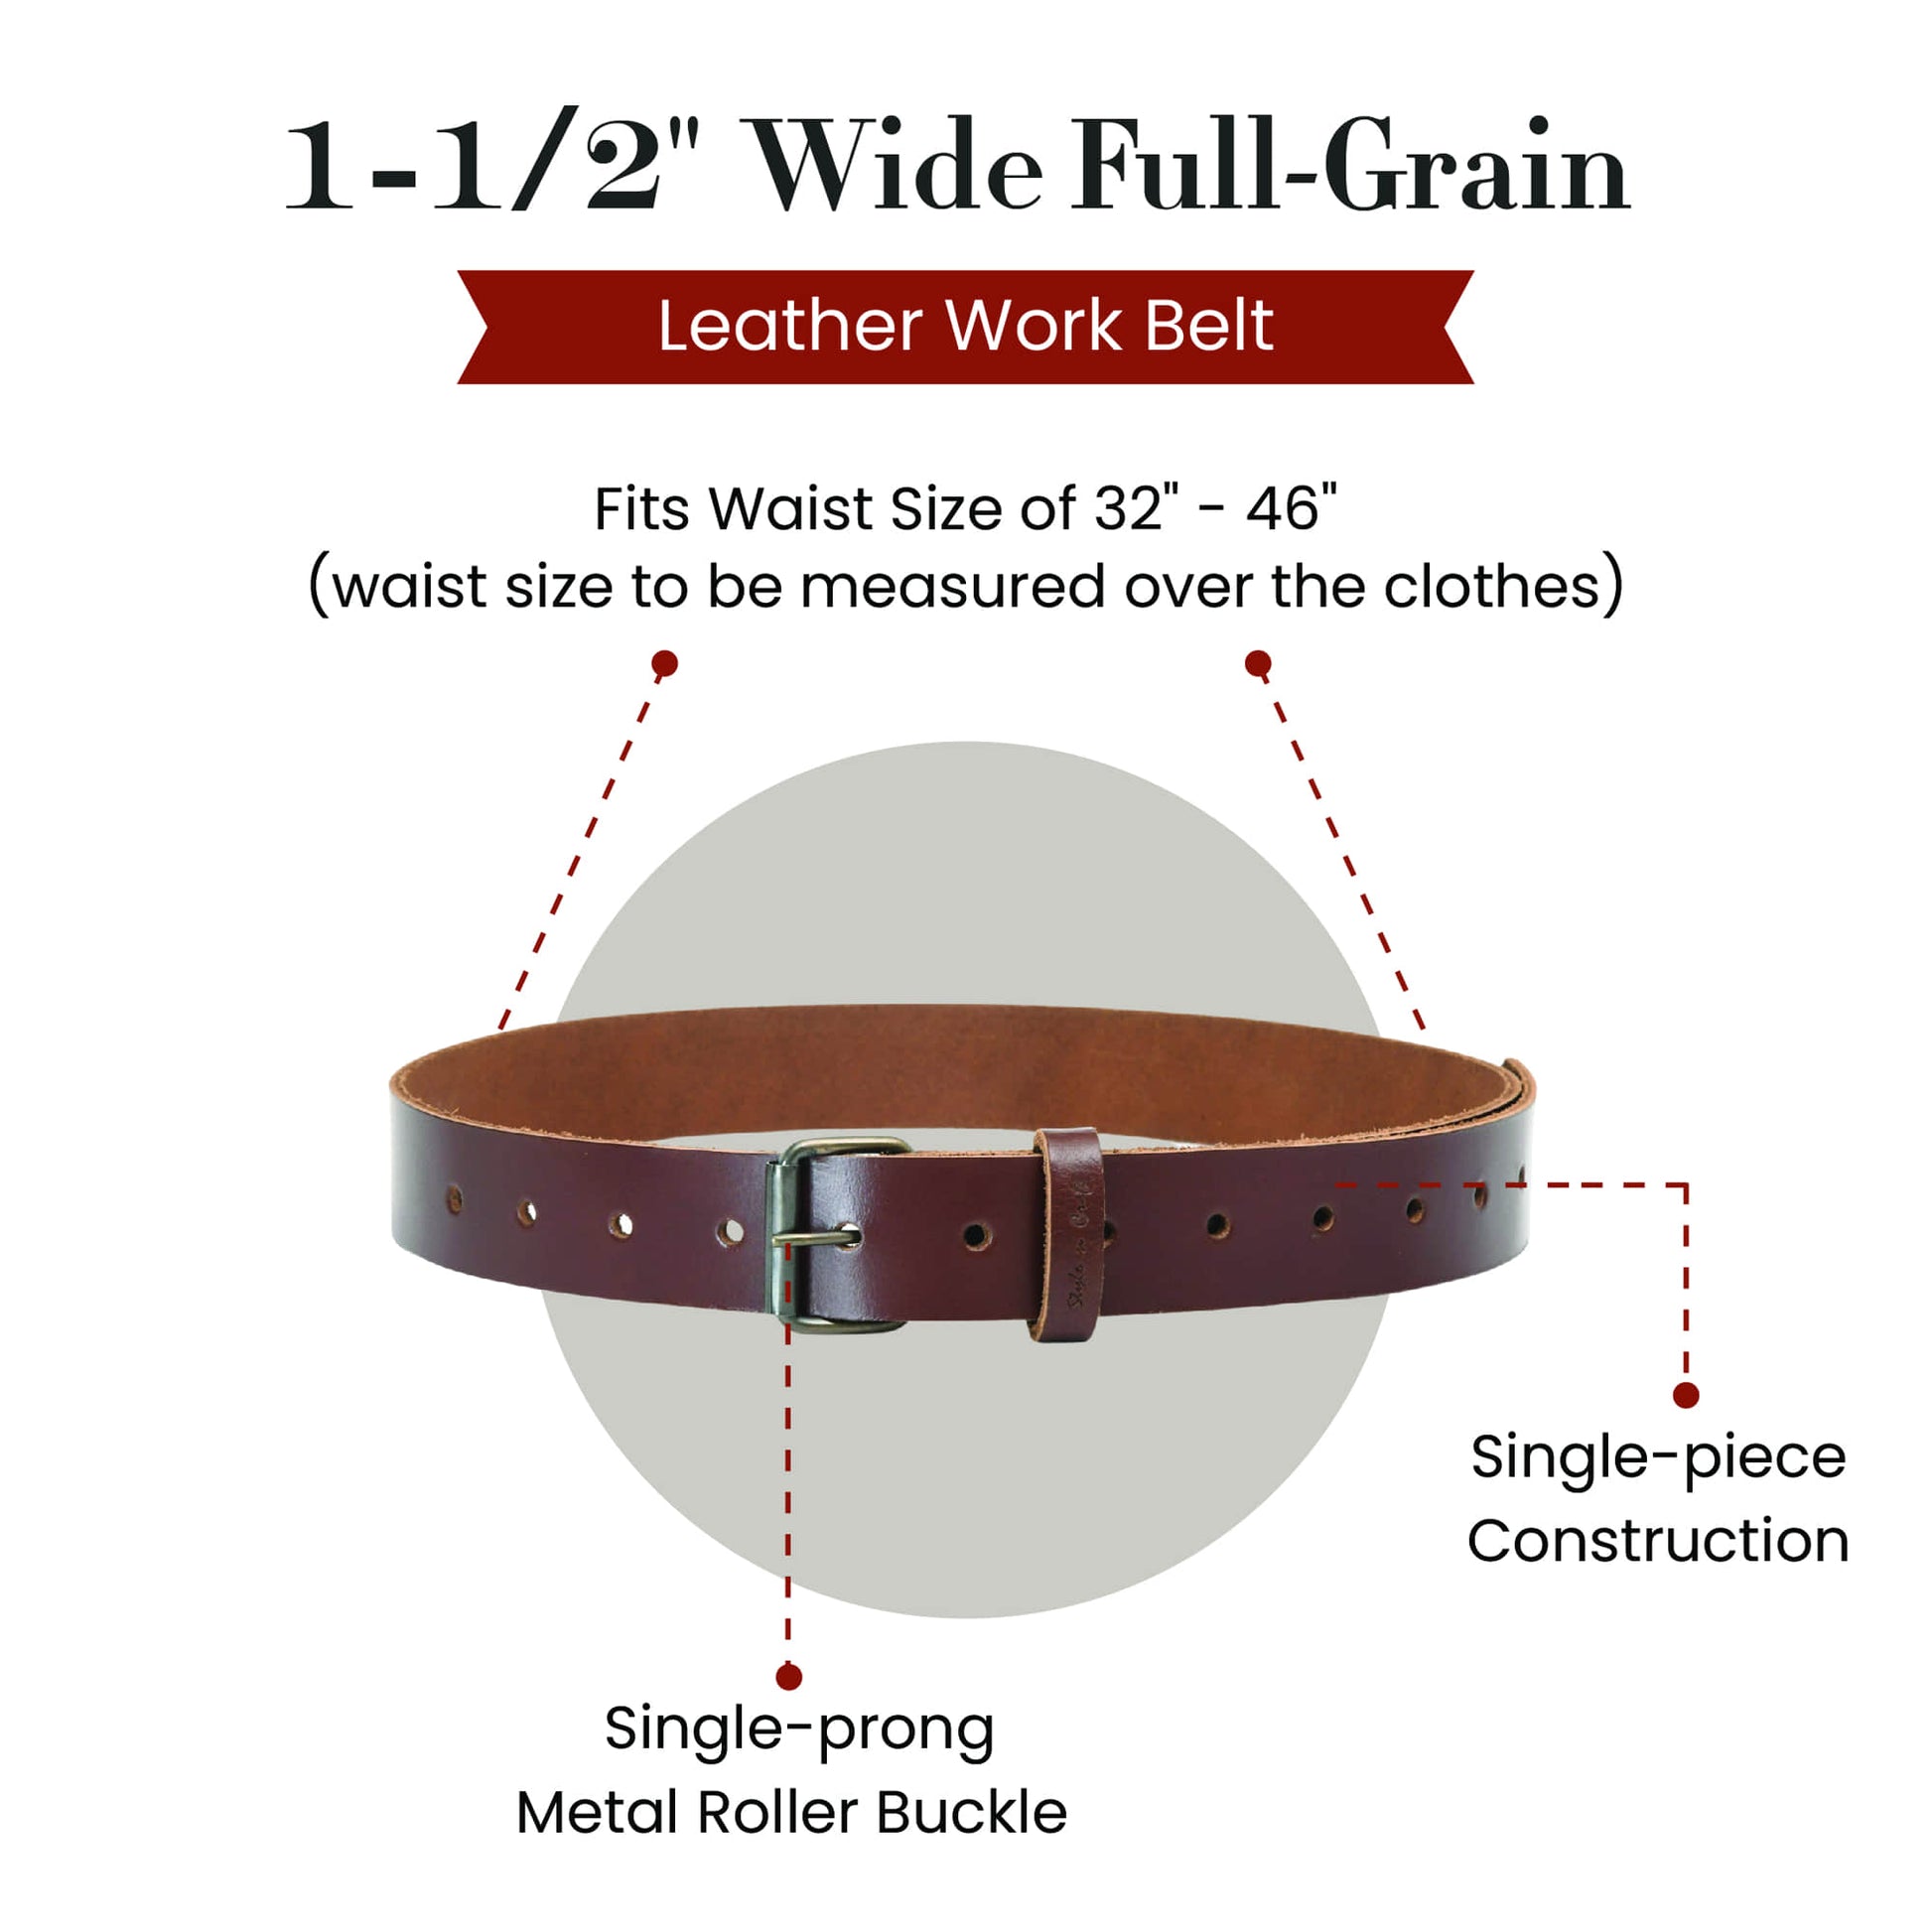 Style n Craft 98051 - One and a Half Inch Wide Work Belt in Dark Tan Heavy Full Grain Leather with Metal Roller Buckle in Antique Finish - Front View Showing the Details